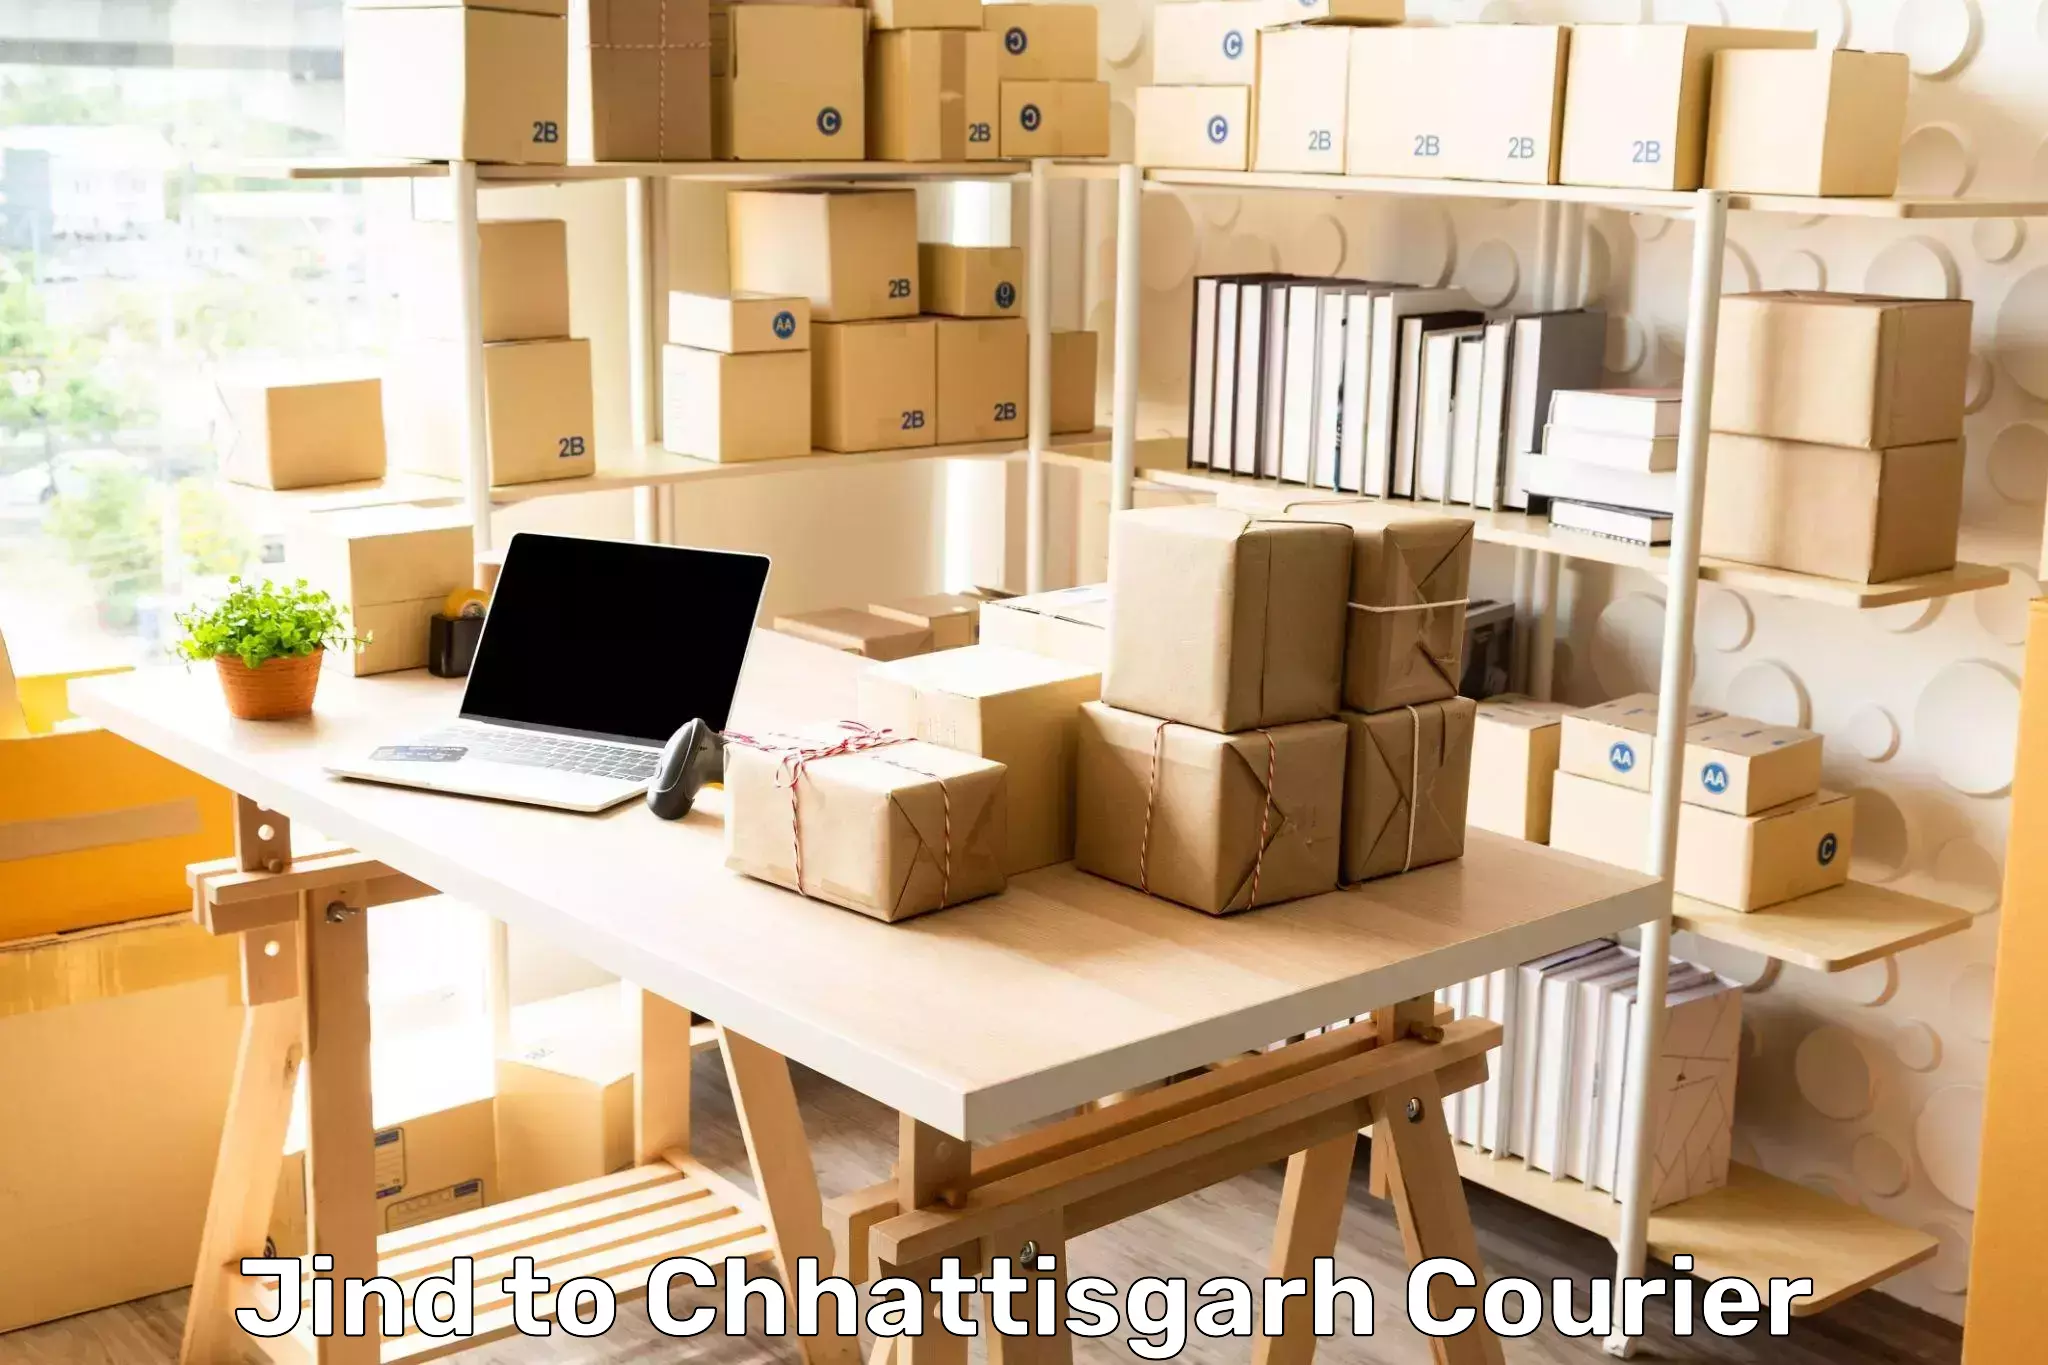 State-of-the-art courier technology Jind to Chhattisgarh